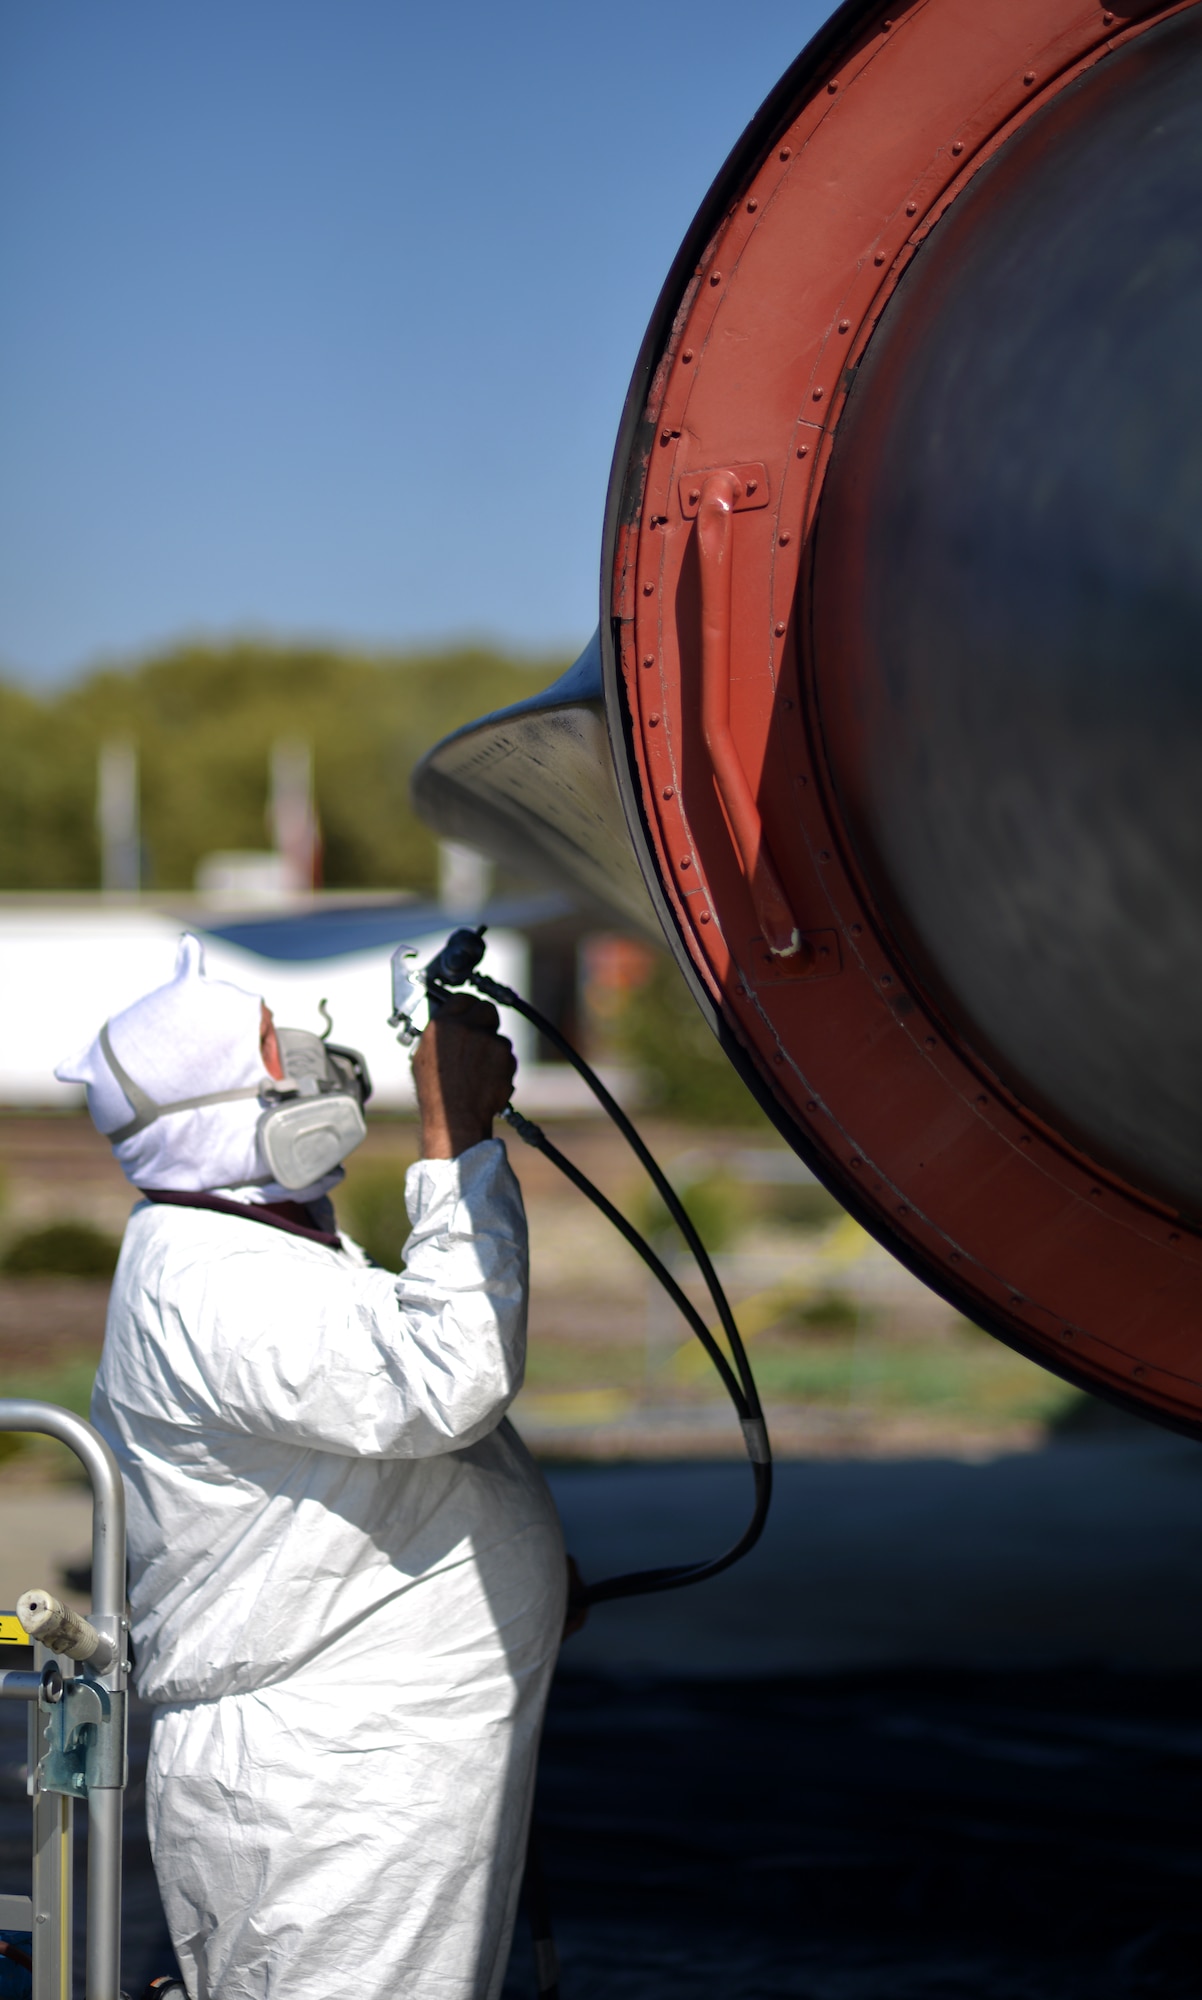 Rick Ashcraft paints the SR-71 Blackbird static display at Heritage Park, Beale Air Force Base, Calif., Sept. 29, 2012. The first Blackbird arrived at Beale in January 1966 and stayed until it was decommissioned Jan. 26, 1990. (U.S. Air Force photo by Airman 1st Class Andrew Buchanan)